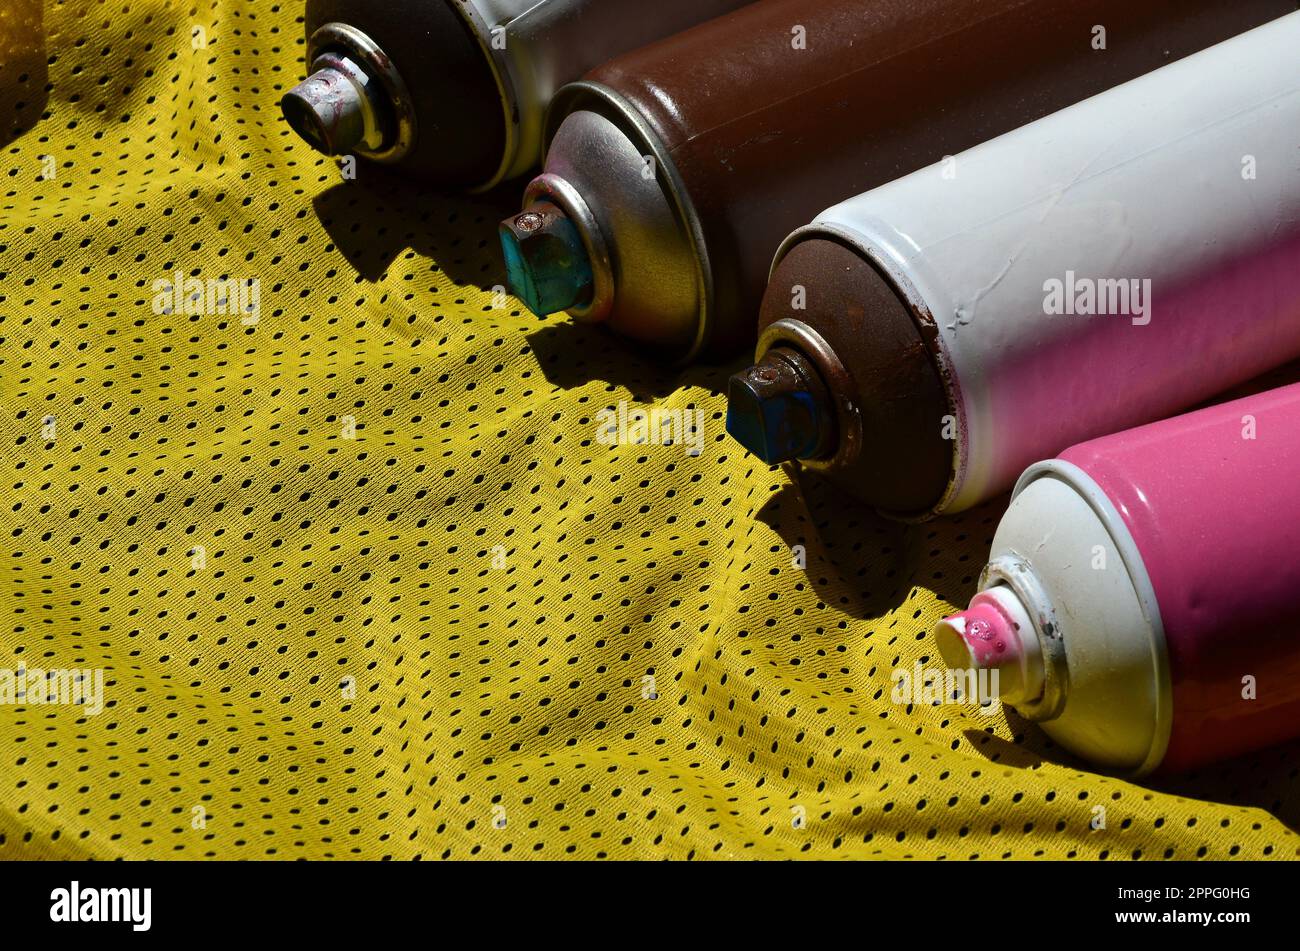 Several used aerosol paint sprayers lie on the sports shirt of a basketball player made of polyester fabric. The concept of youth street art, active sports and eventful lifestyle Stock Photo